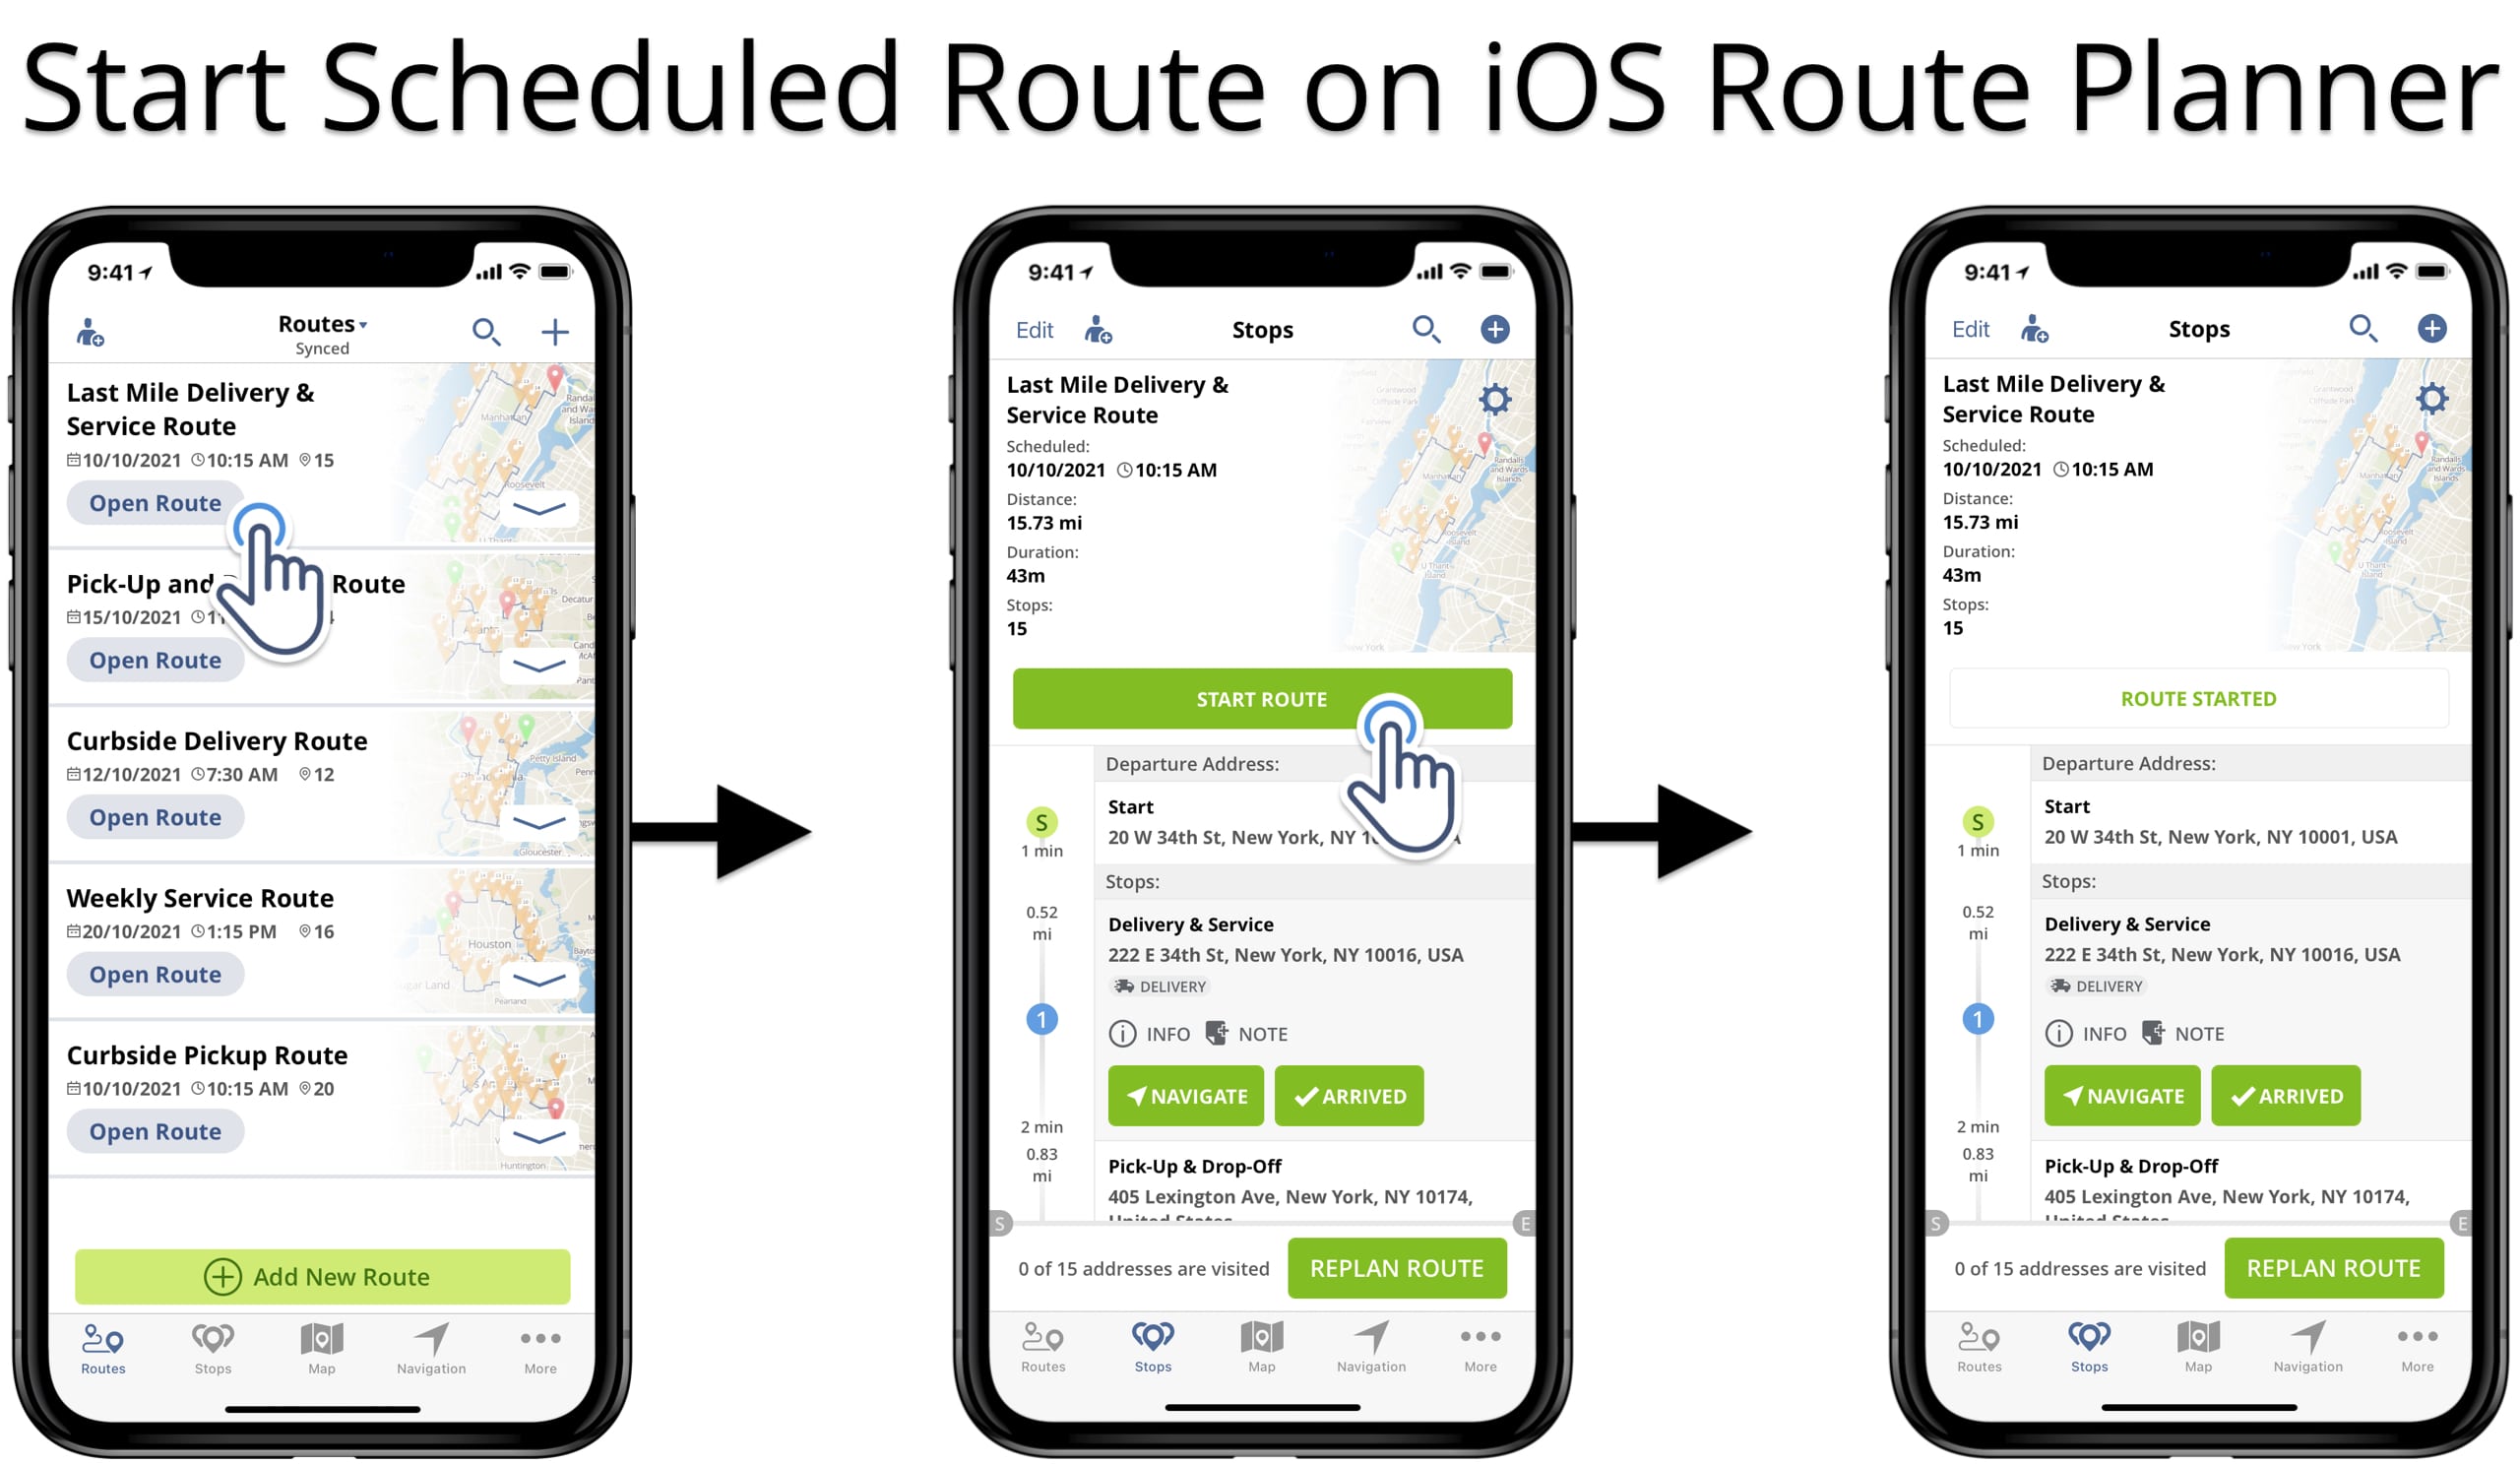 Start last mile delivery route on iOS Route Planner app to add mandatory text attachments.